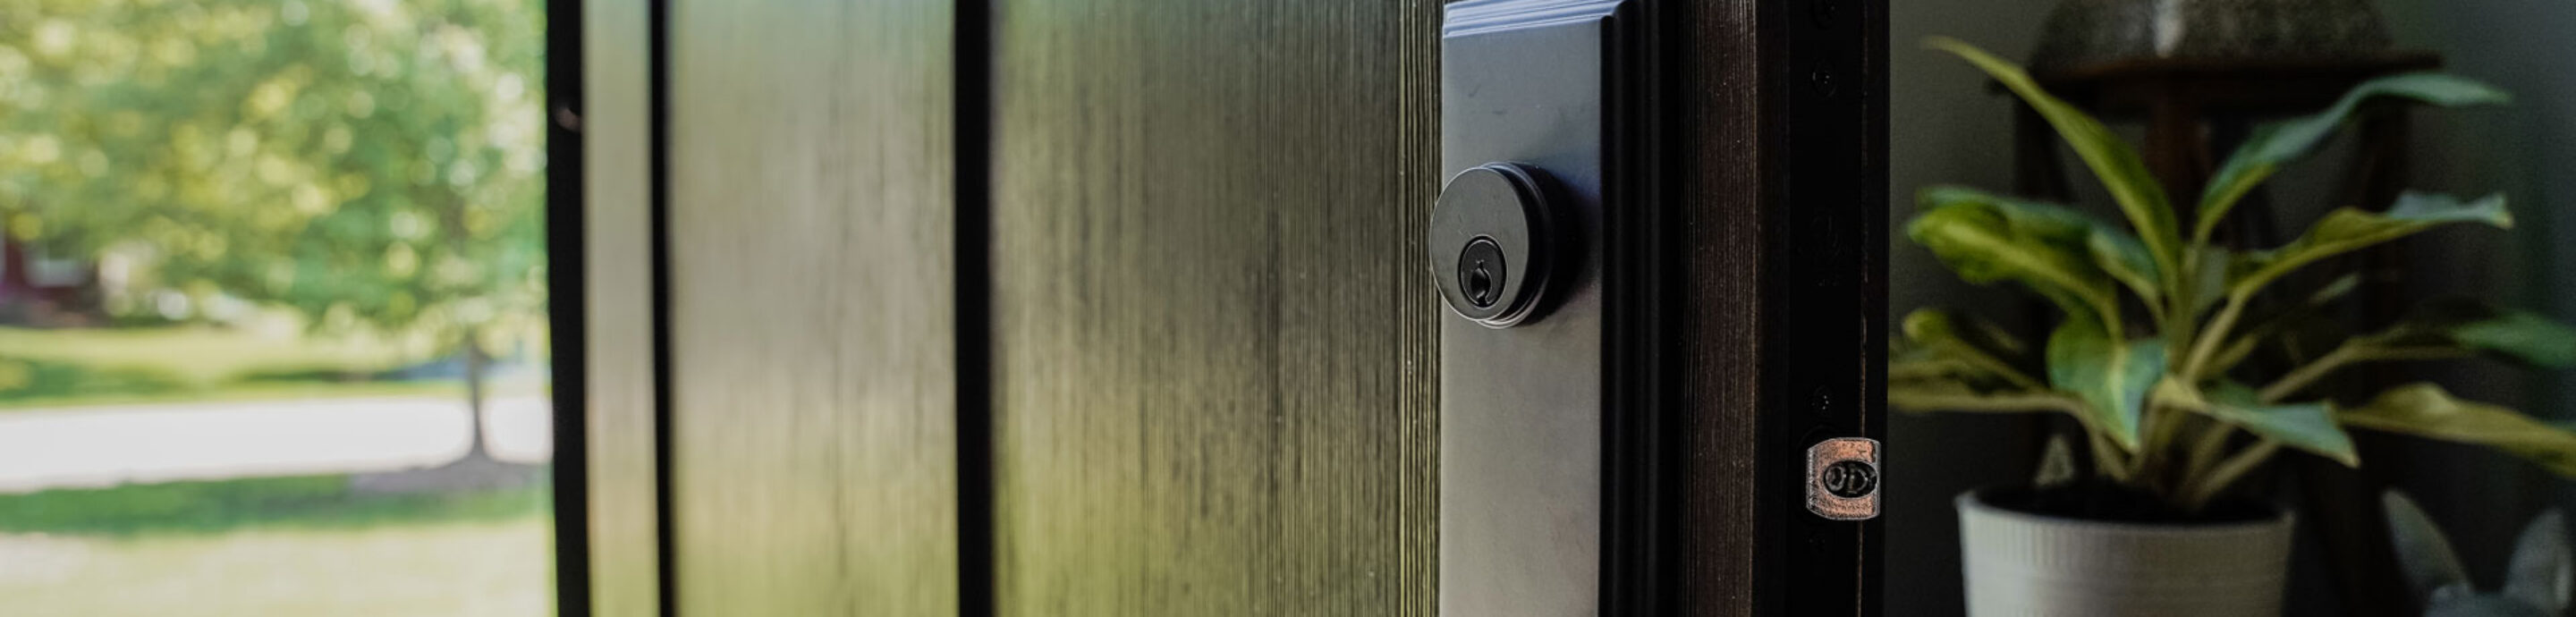 Close-up view of a Signet® Fir entry door in Espresso